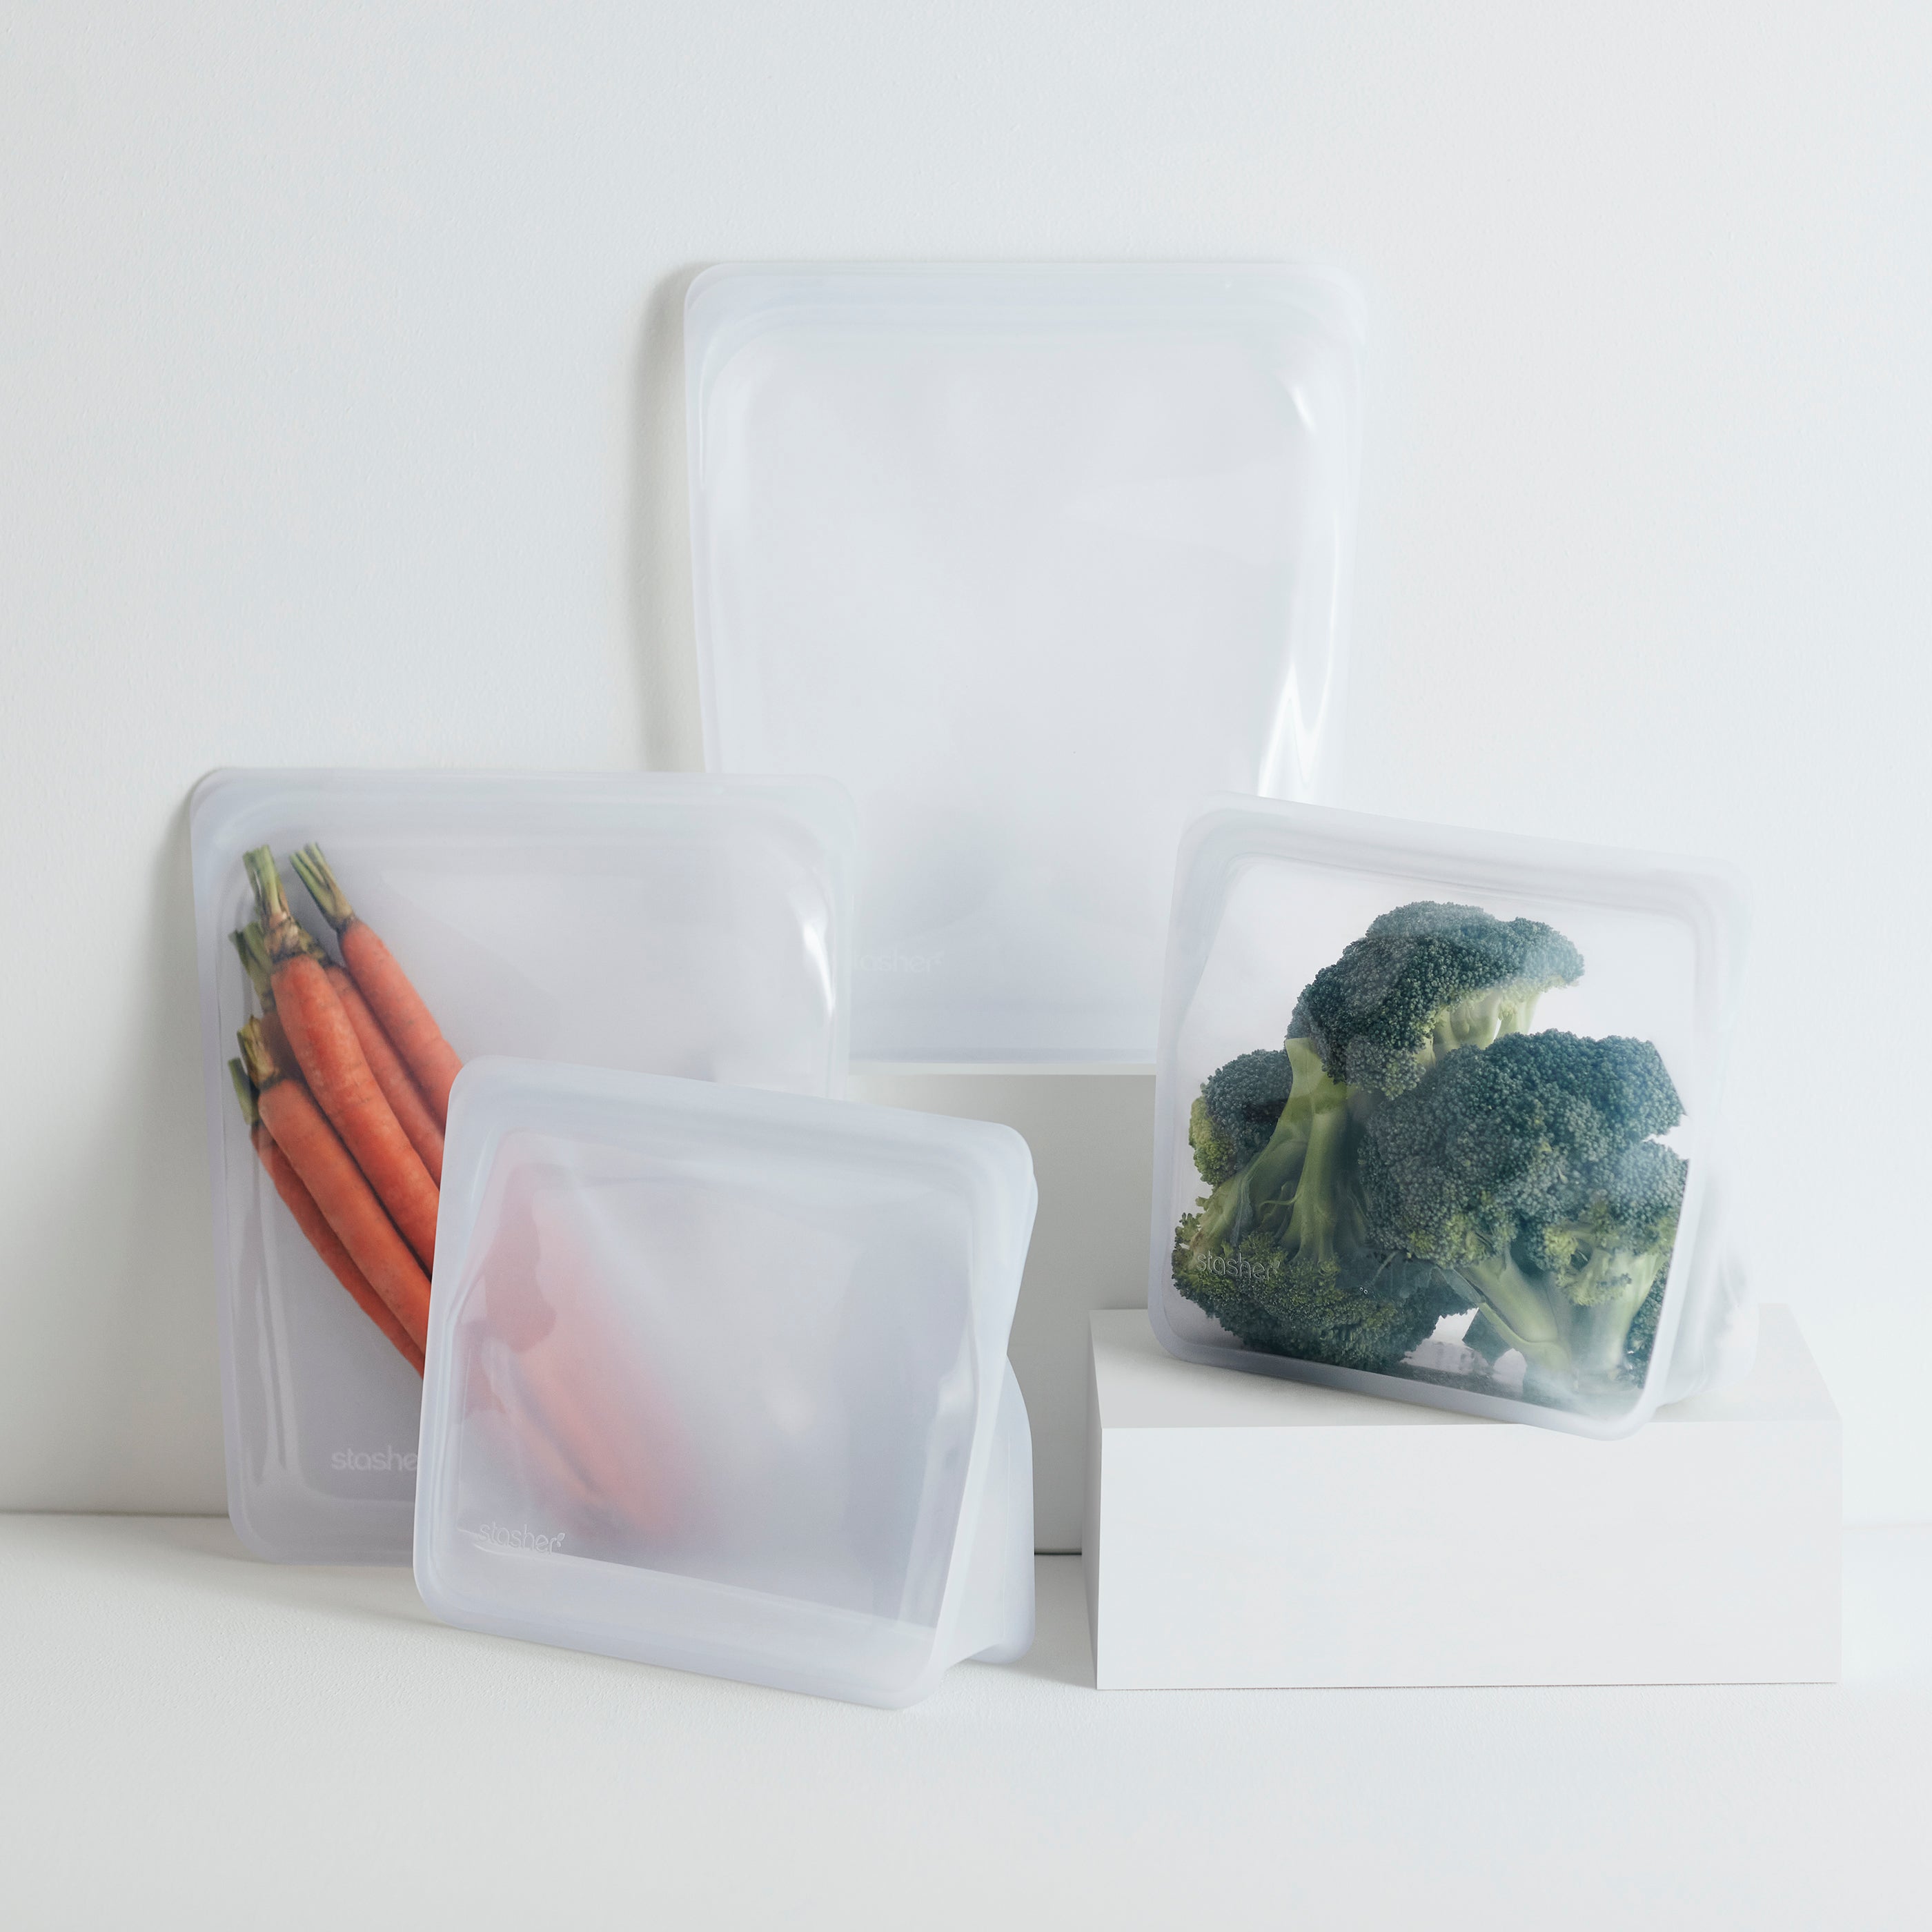 Stasher 56 oz. Stand-Up Mid Silicon Food Storage Bag in Clear